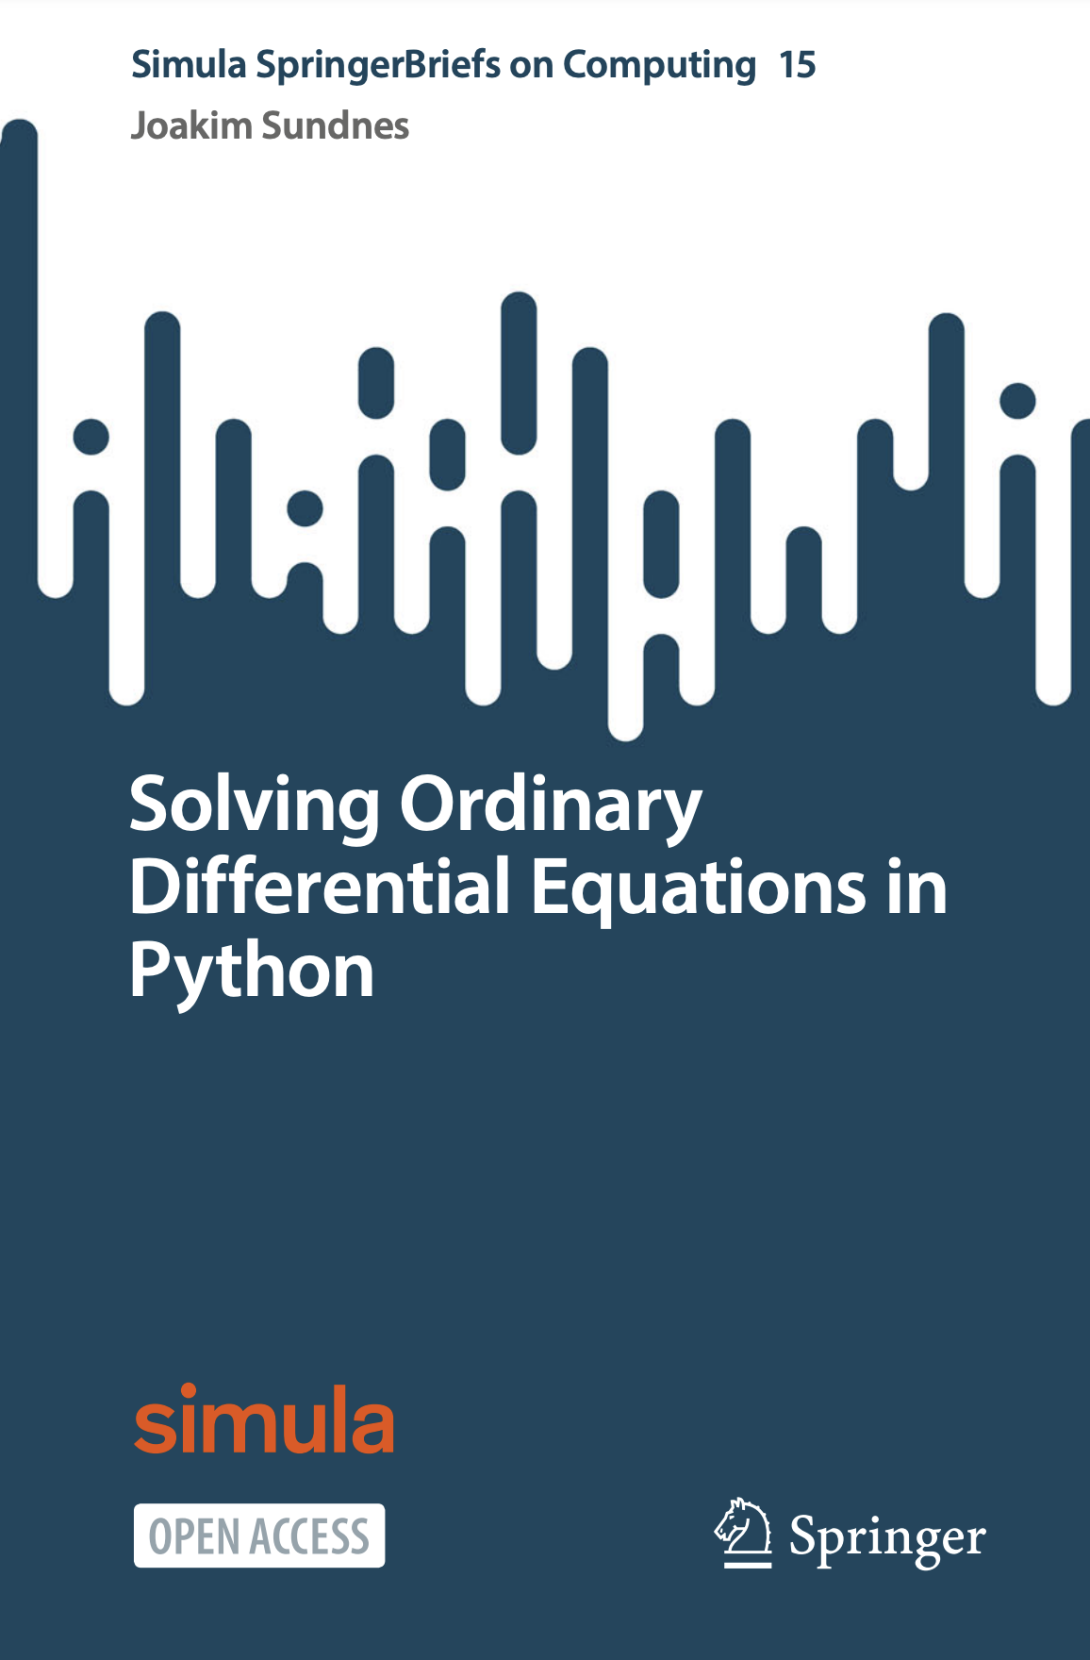 New book in the SpringerBriefs series: Solving Ordinary 